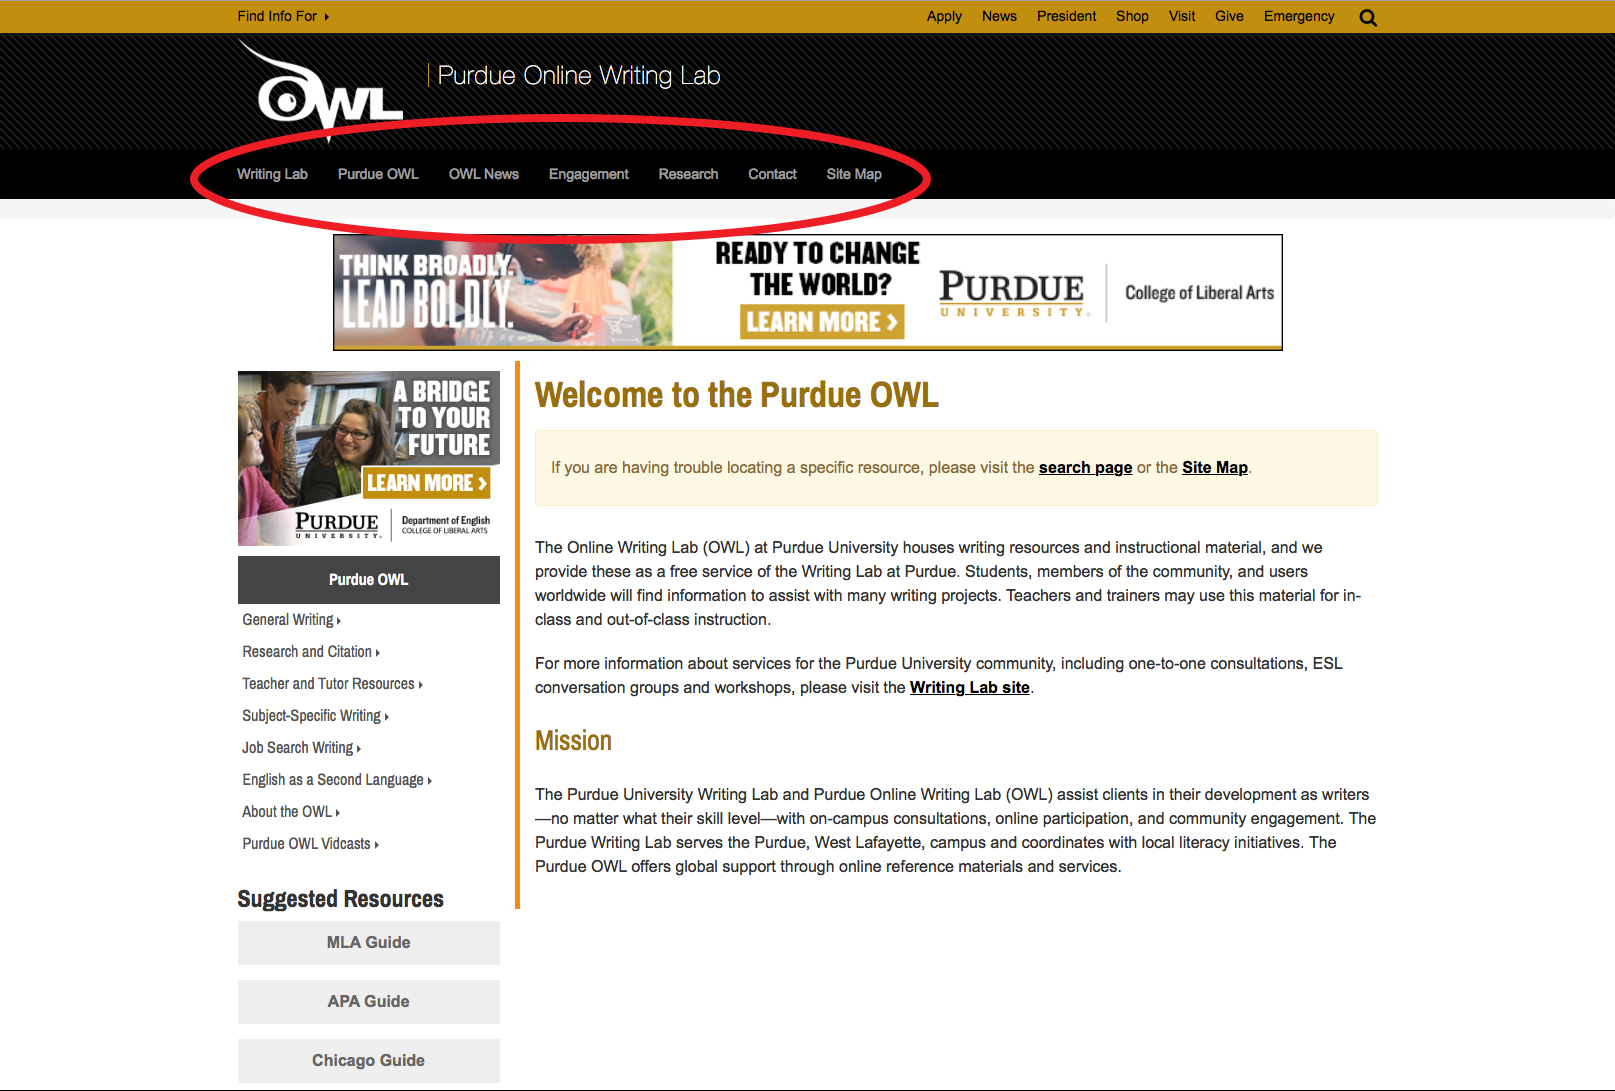 This image shows the OWL homepage with the site section links highlighted.